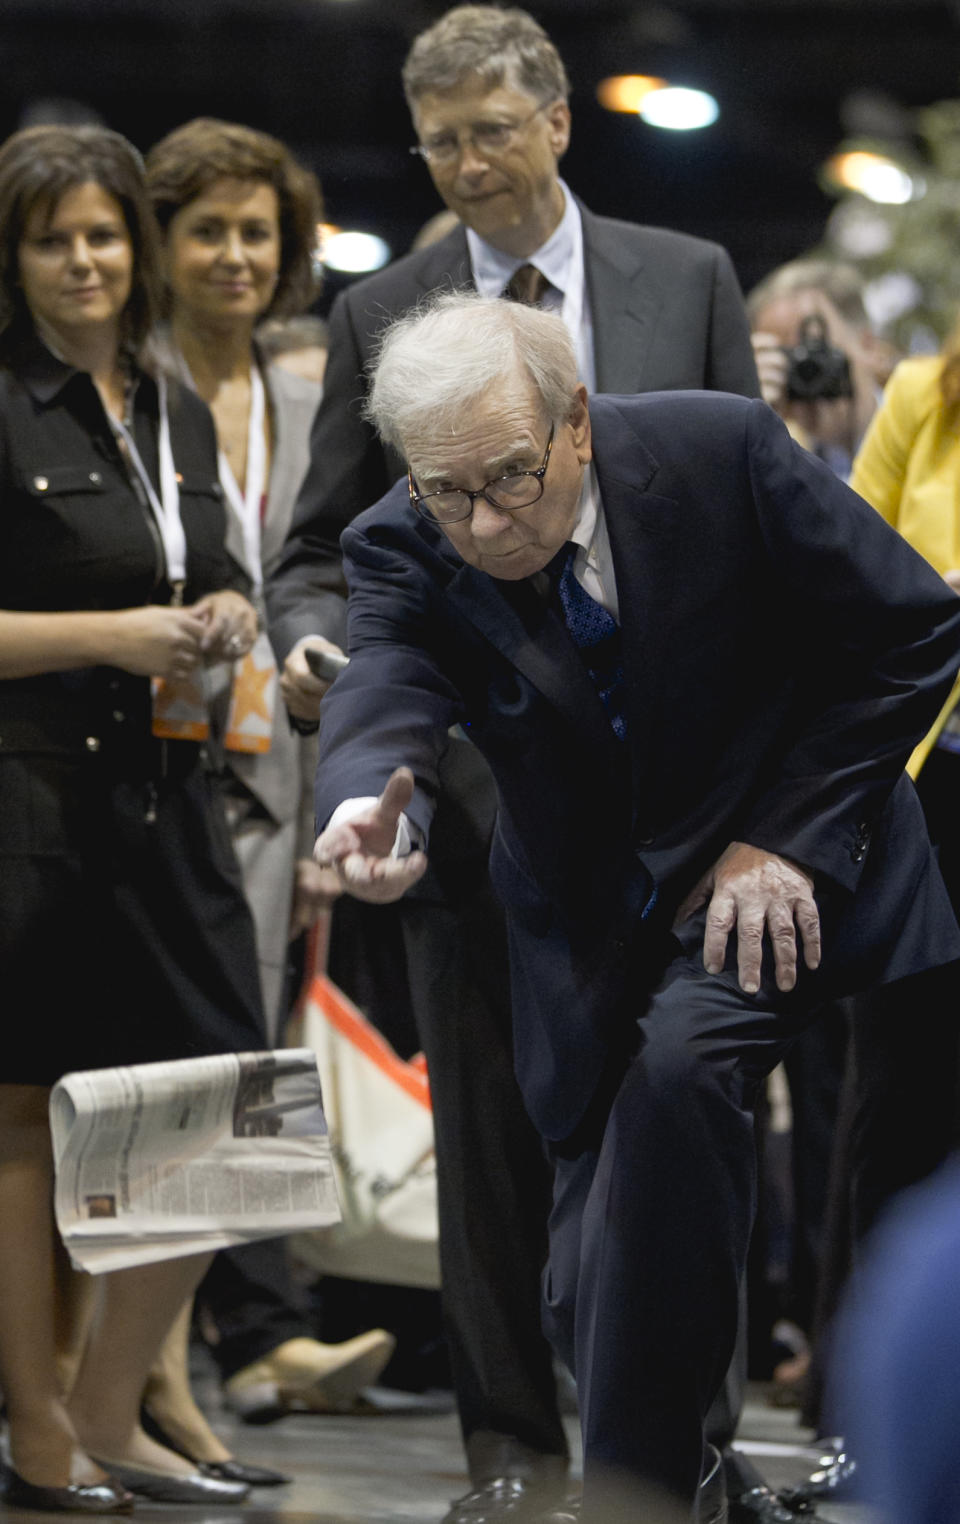 Warren Buffett, chairman and CEO of Berkshire Hathaway tosses a newspaper during a newspaper tossing competition in Omaha, Neb., Saturday, May 5, 2012. Bill Gates watches at rear. Berkshire Hathaway is holding it's annual shareholders meeting this weekend. (AP Photo/Nati Harnik)